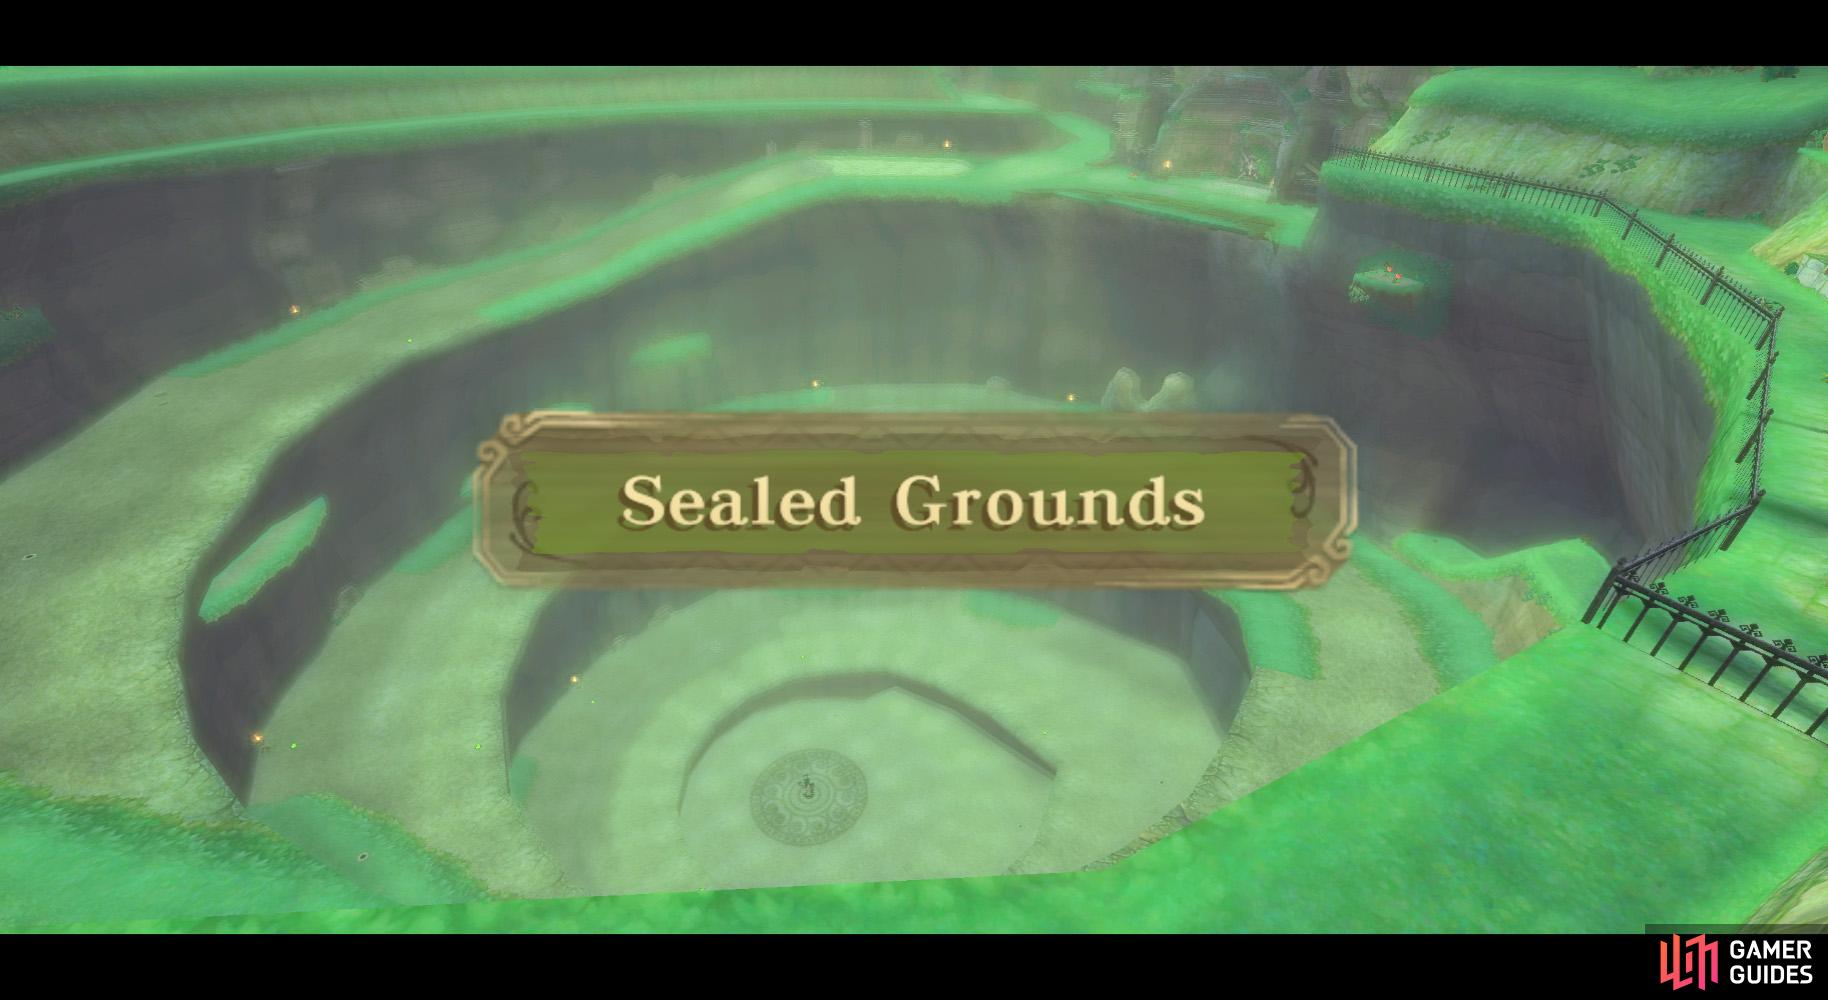 The Sealed Grounds is a grassy hollow where an ancient evil has been sealed.